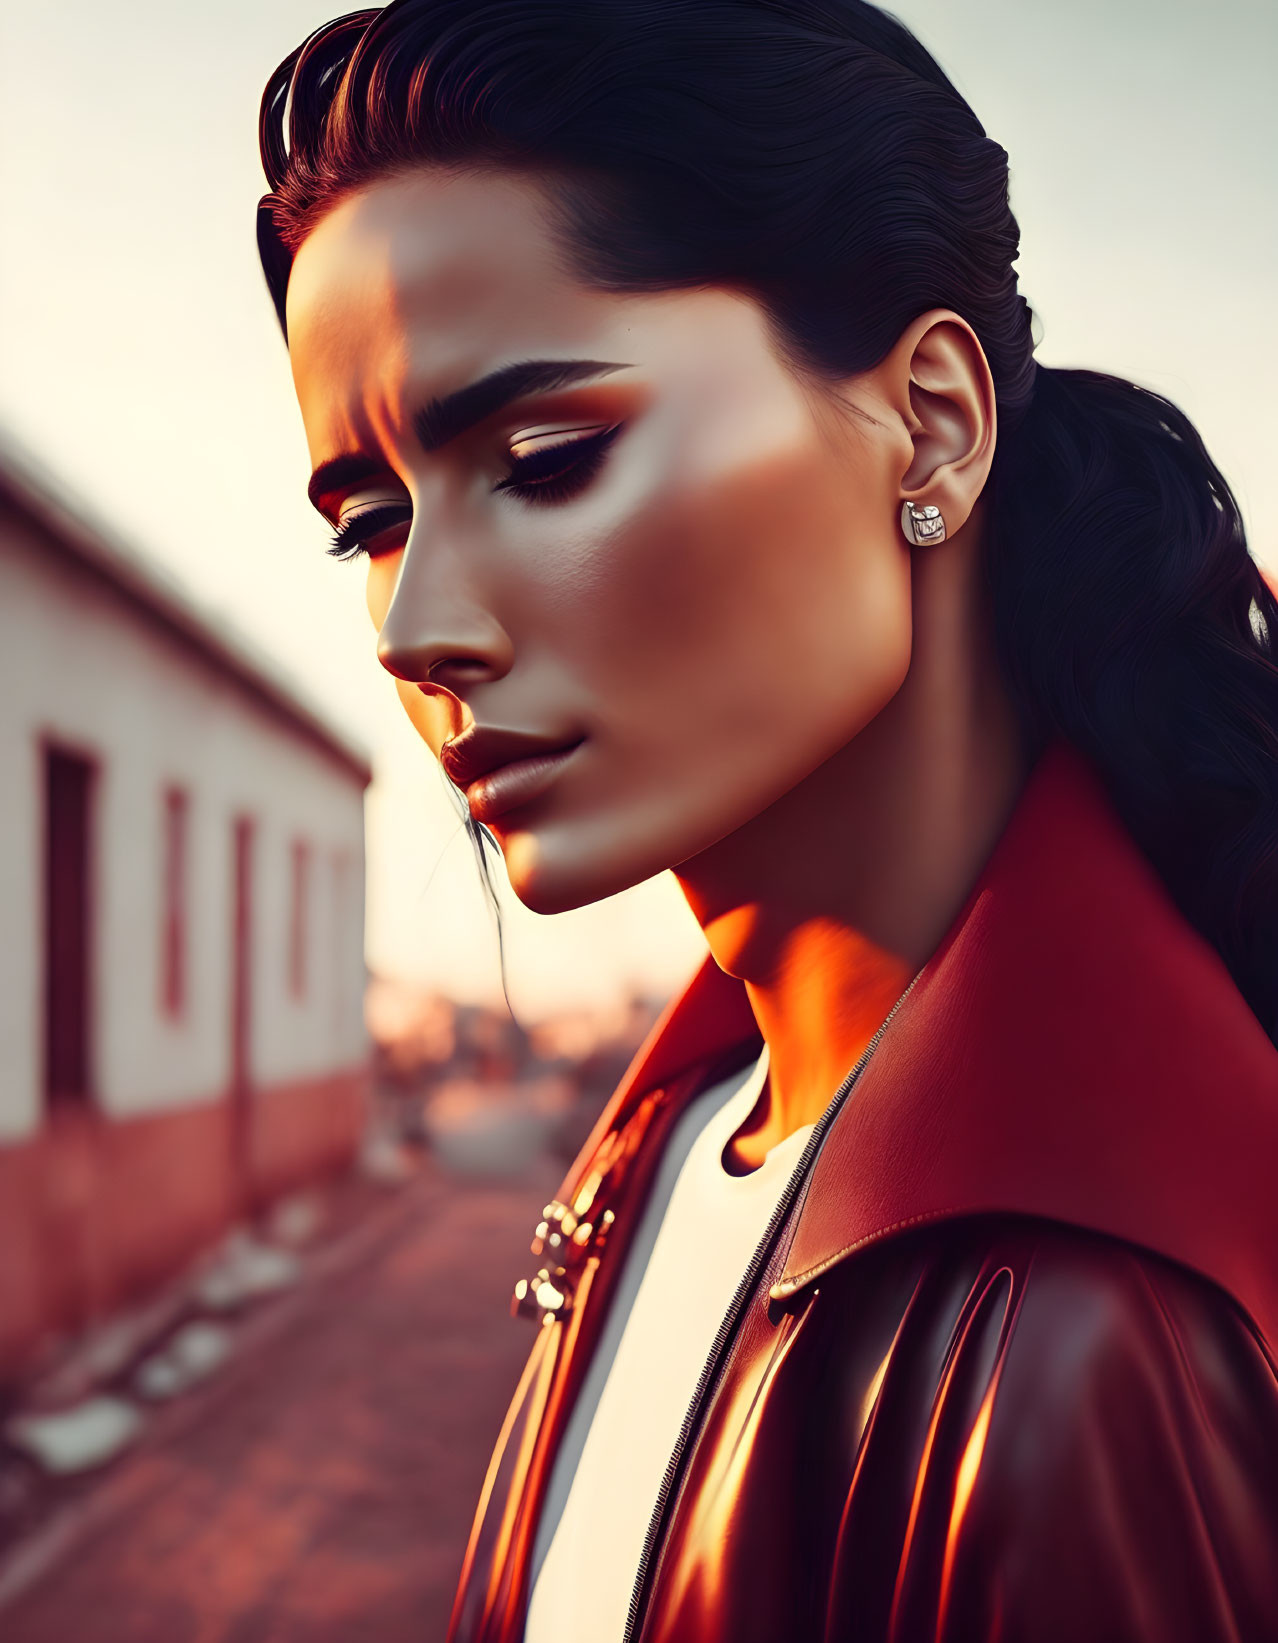 Slicked-back hairstyle woman in red leather jacket with dramatic makeup